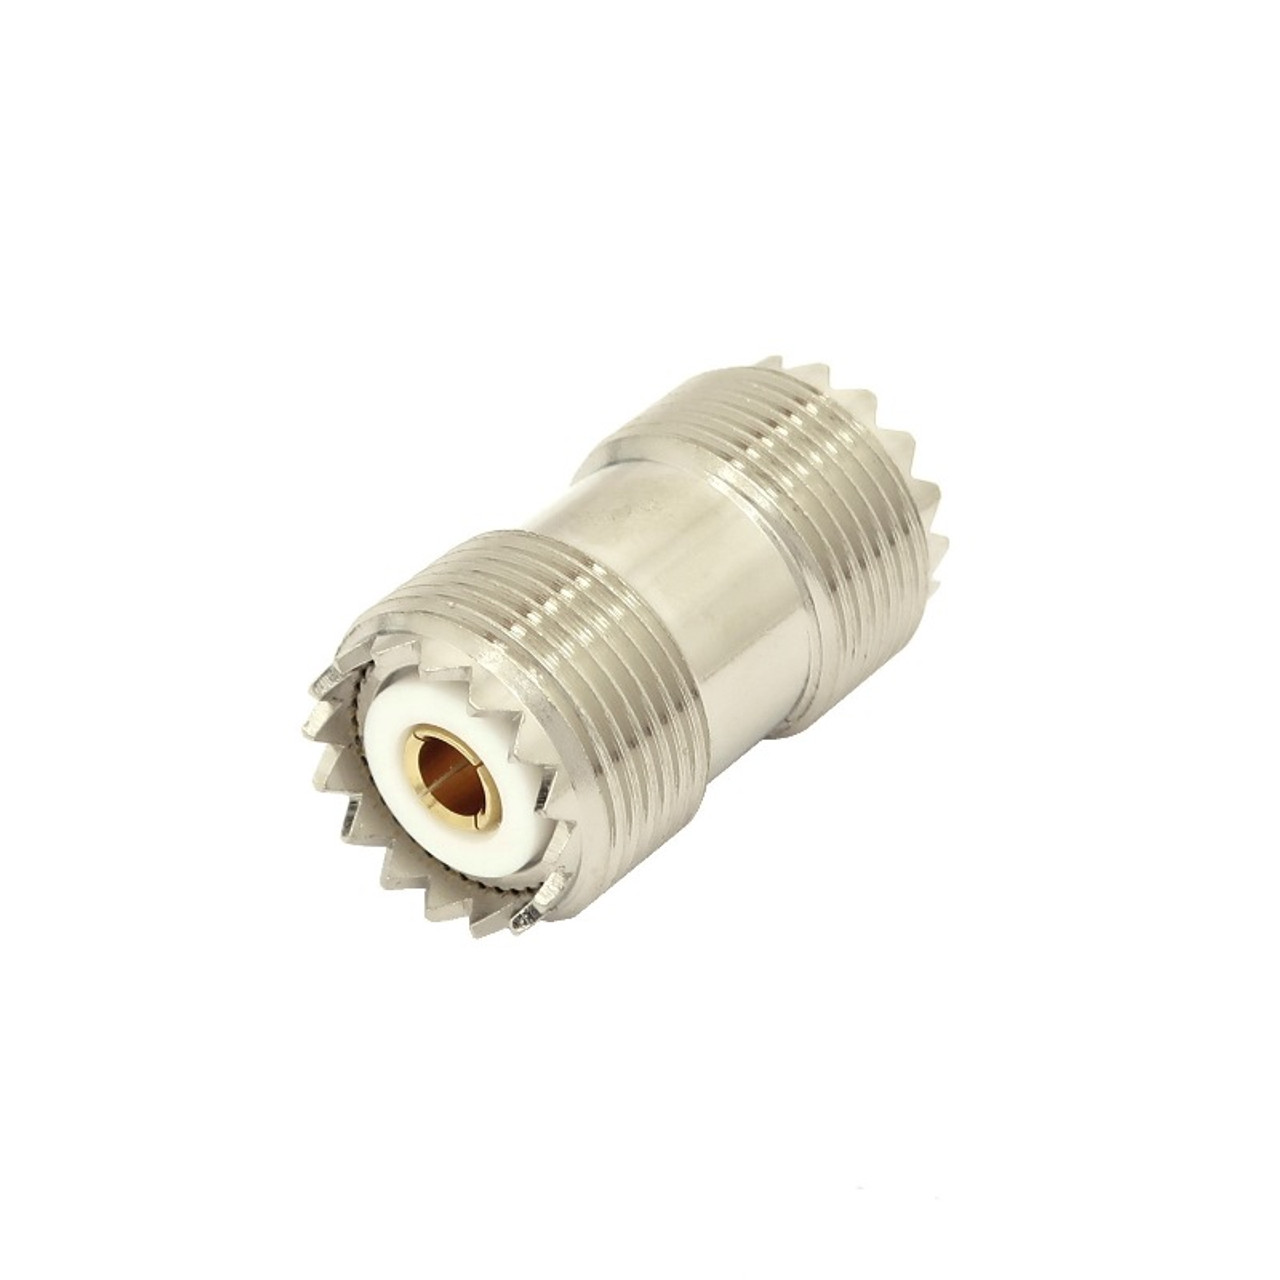 UHF Double Female Barrel Coaxial Adapter Connector - G517